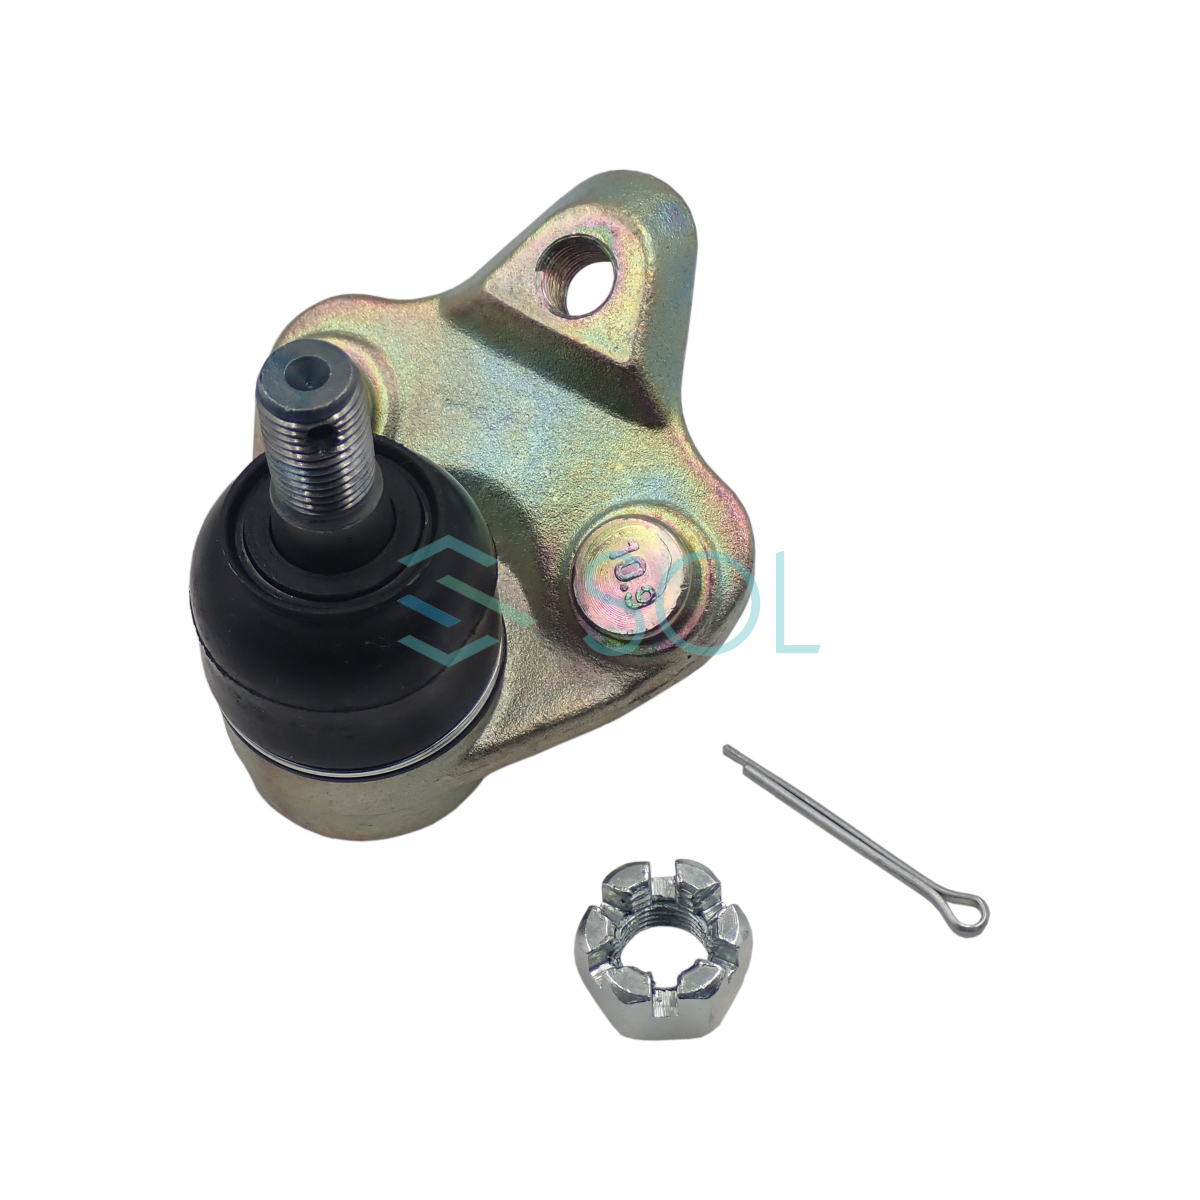  Toyota Celica (ZZT230 ZZT231) Corolla (AE100 AE101) front lower arm ball joint break up pin nut attaching left right common 43330-19115